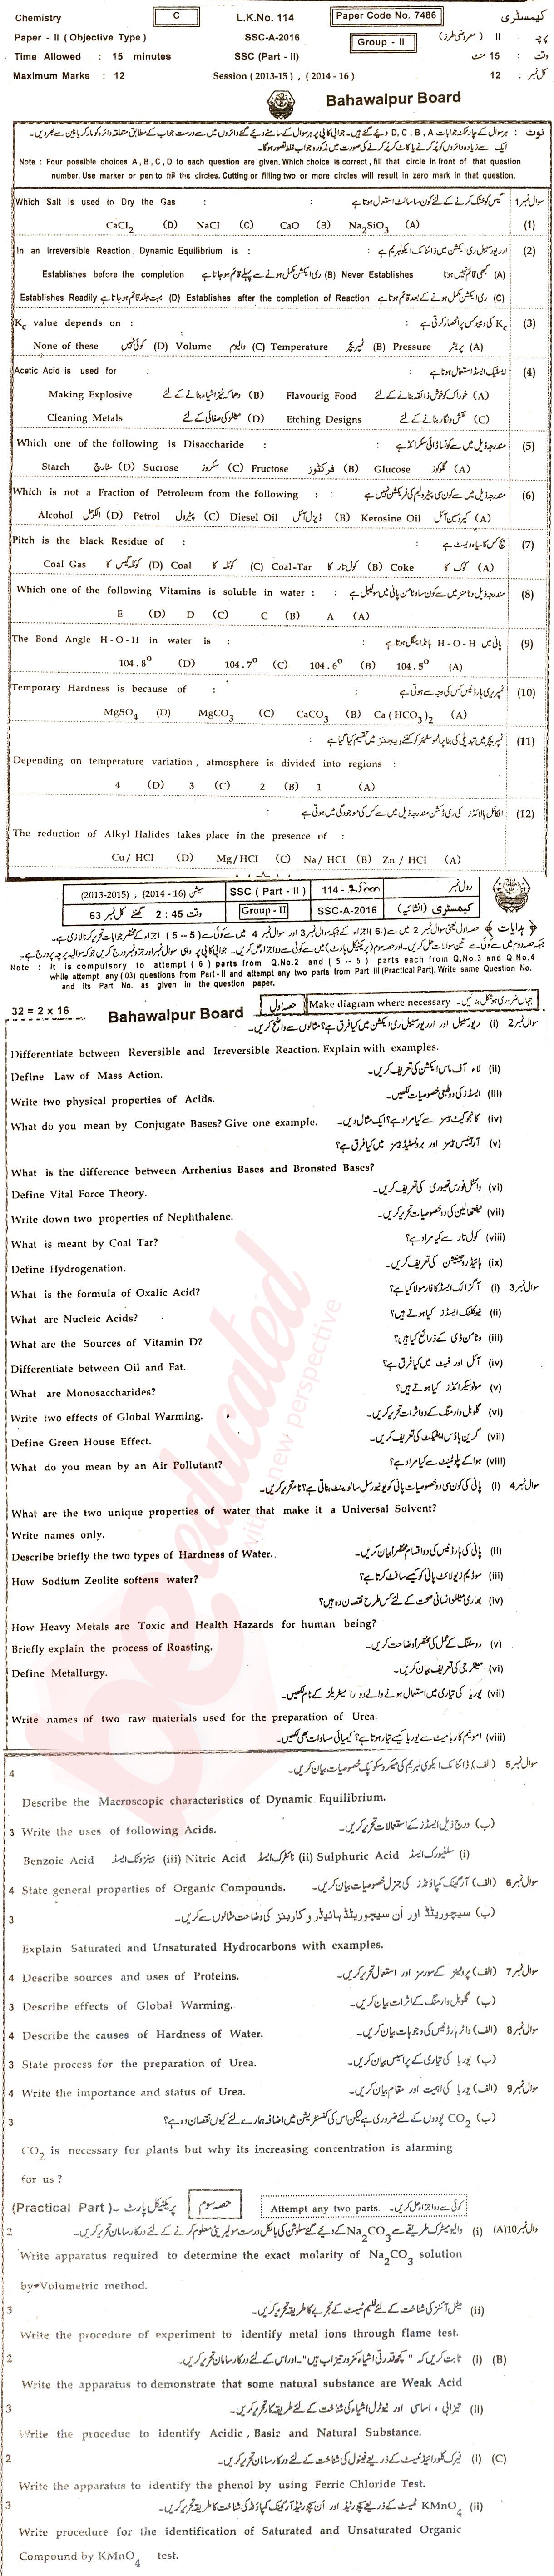 Chemistry 10th class Past Paper Group 2 BISE Bahawalpur 2016